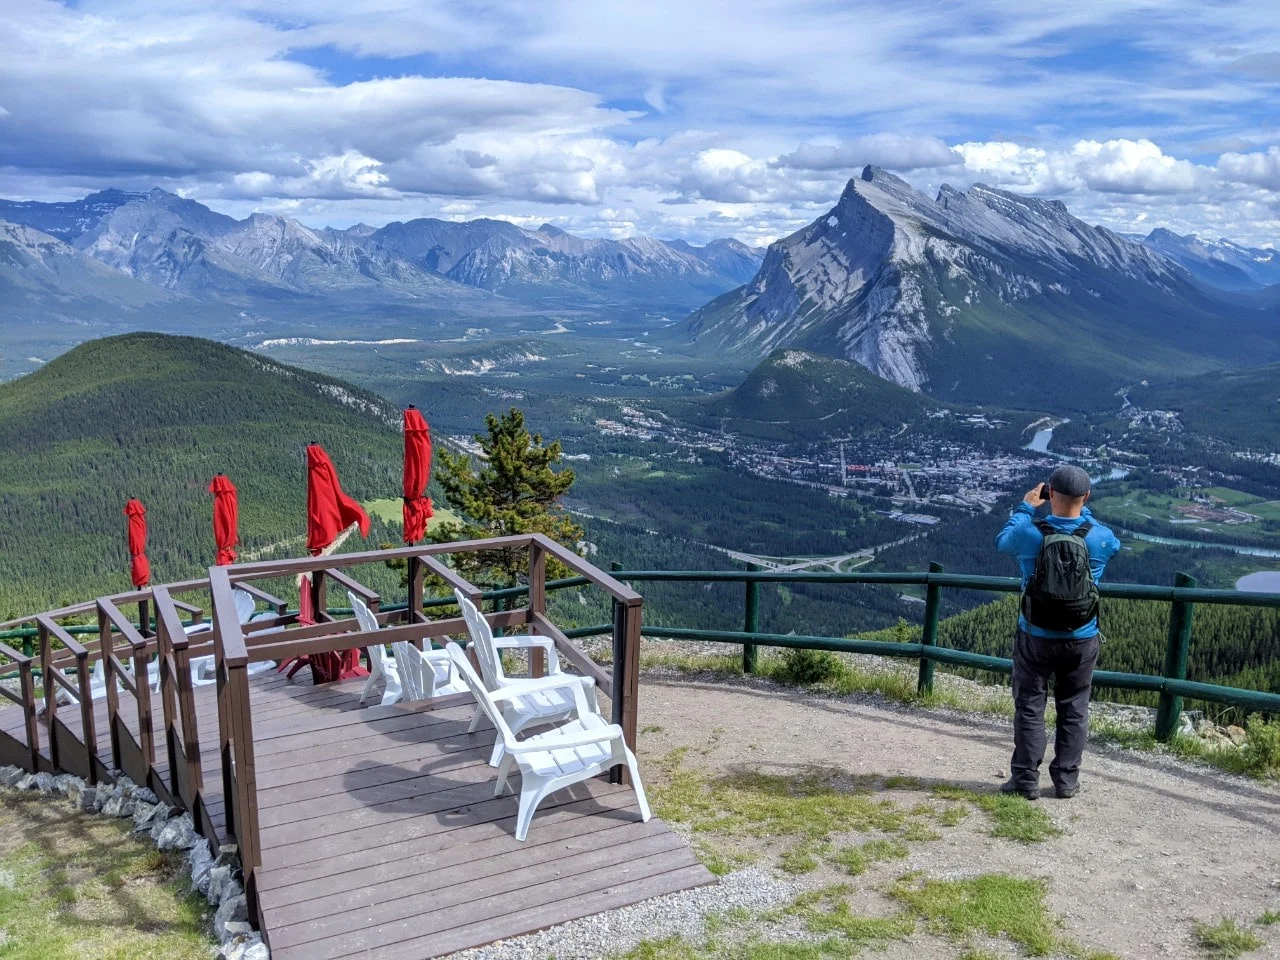 JR standing in front of mountain views at the top of Mt Norquay chairlift, taking a photo